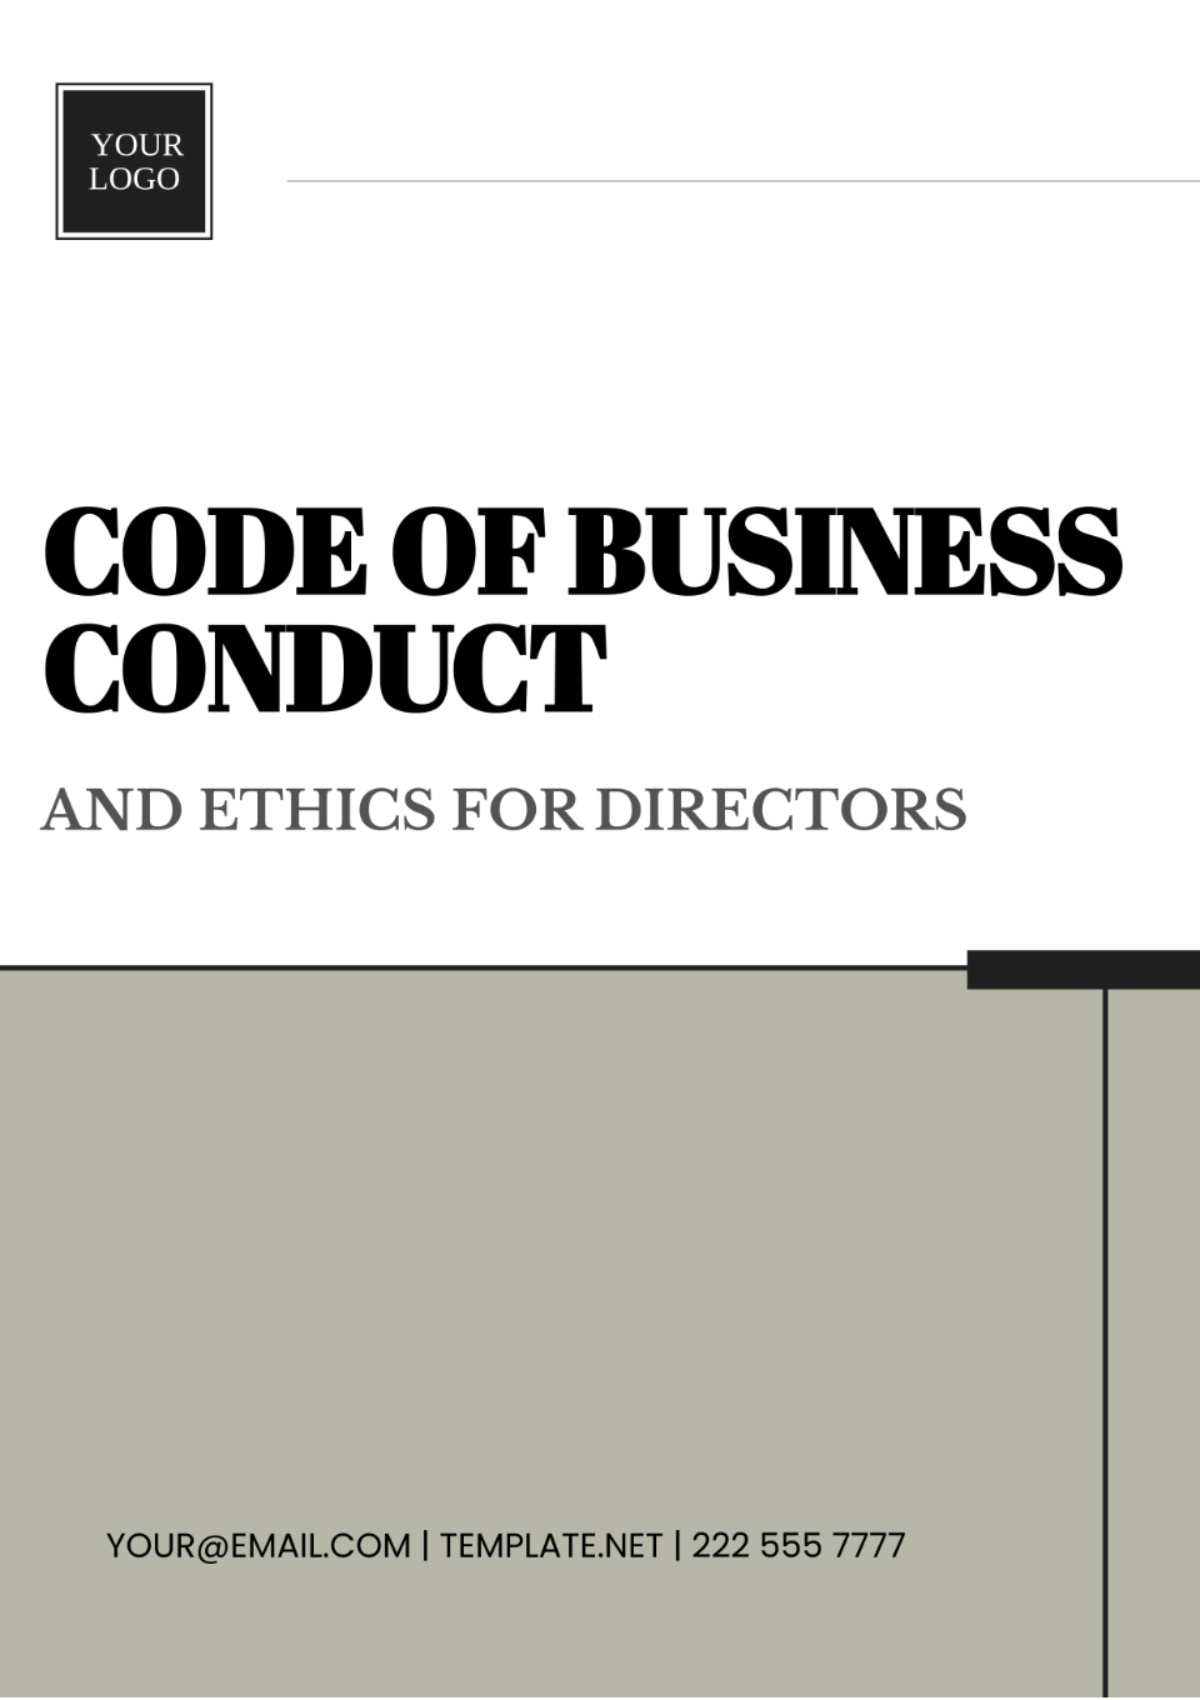 Code of Business Conduct and Ethics for Directors Template